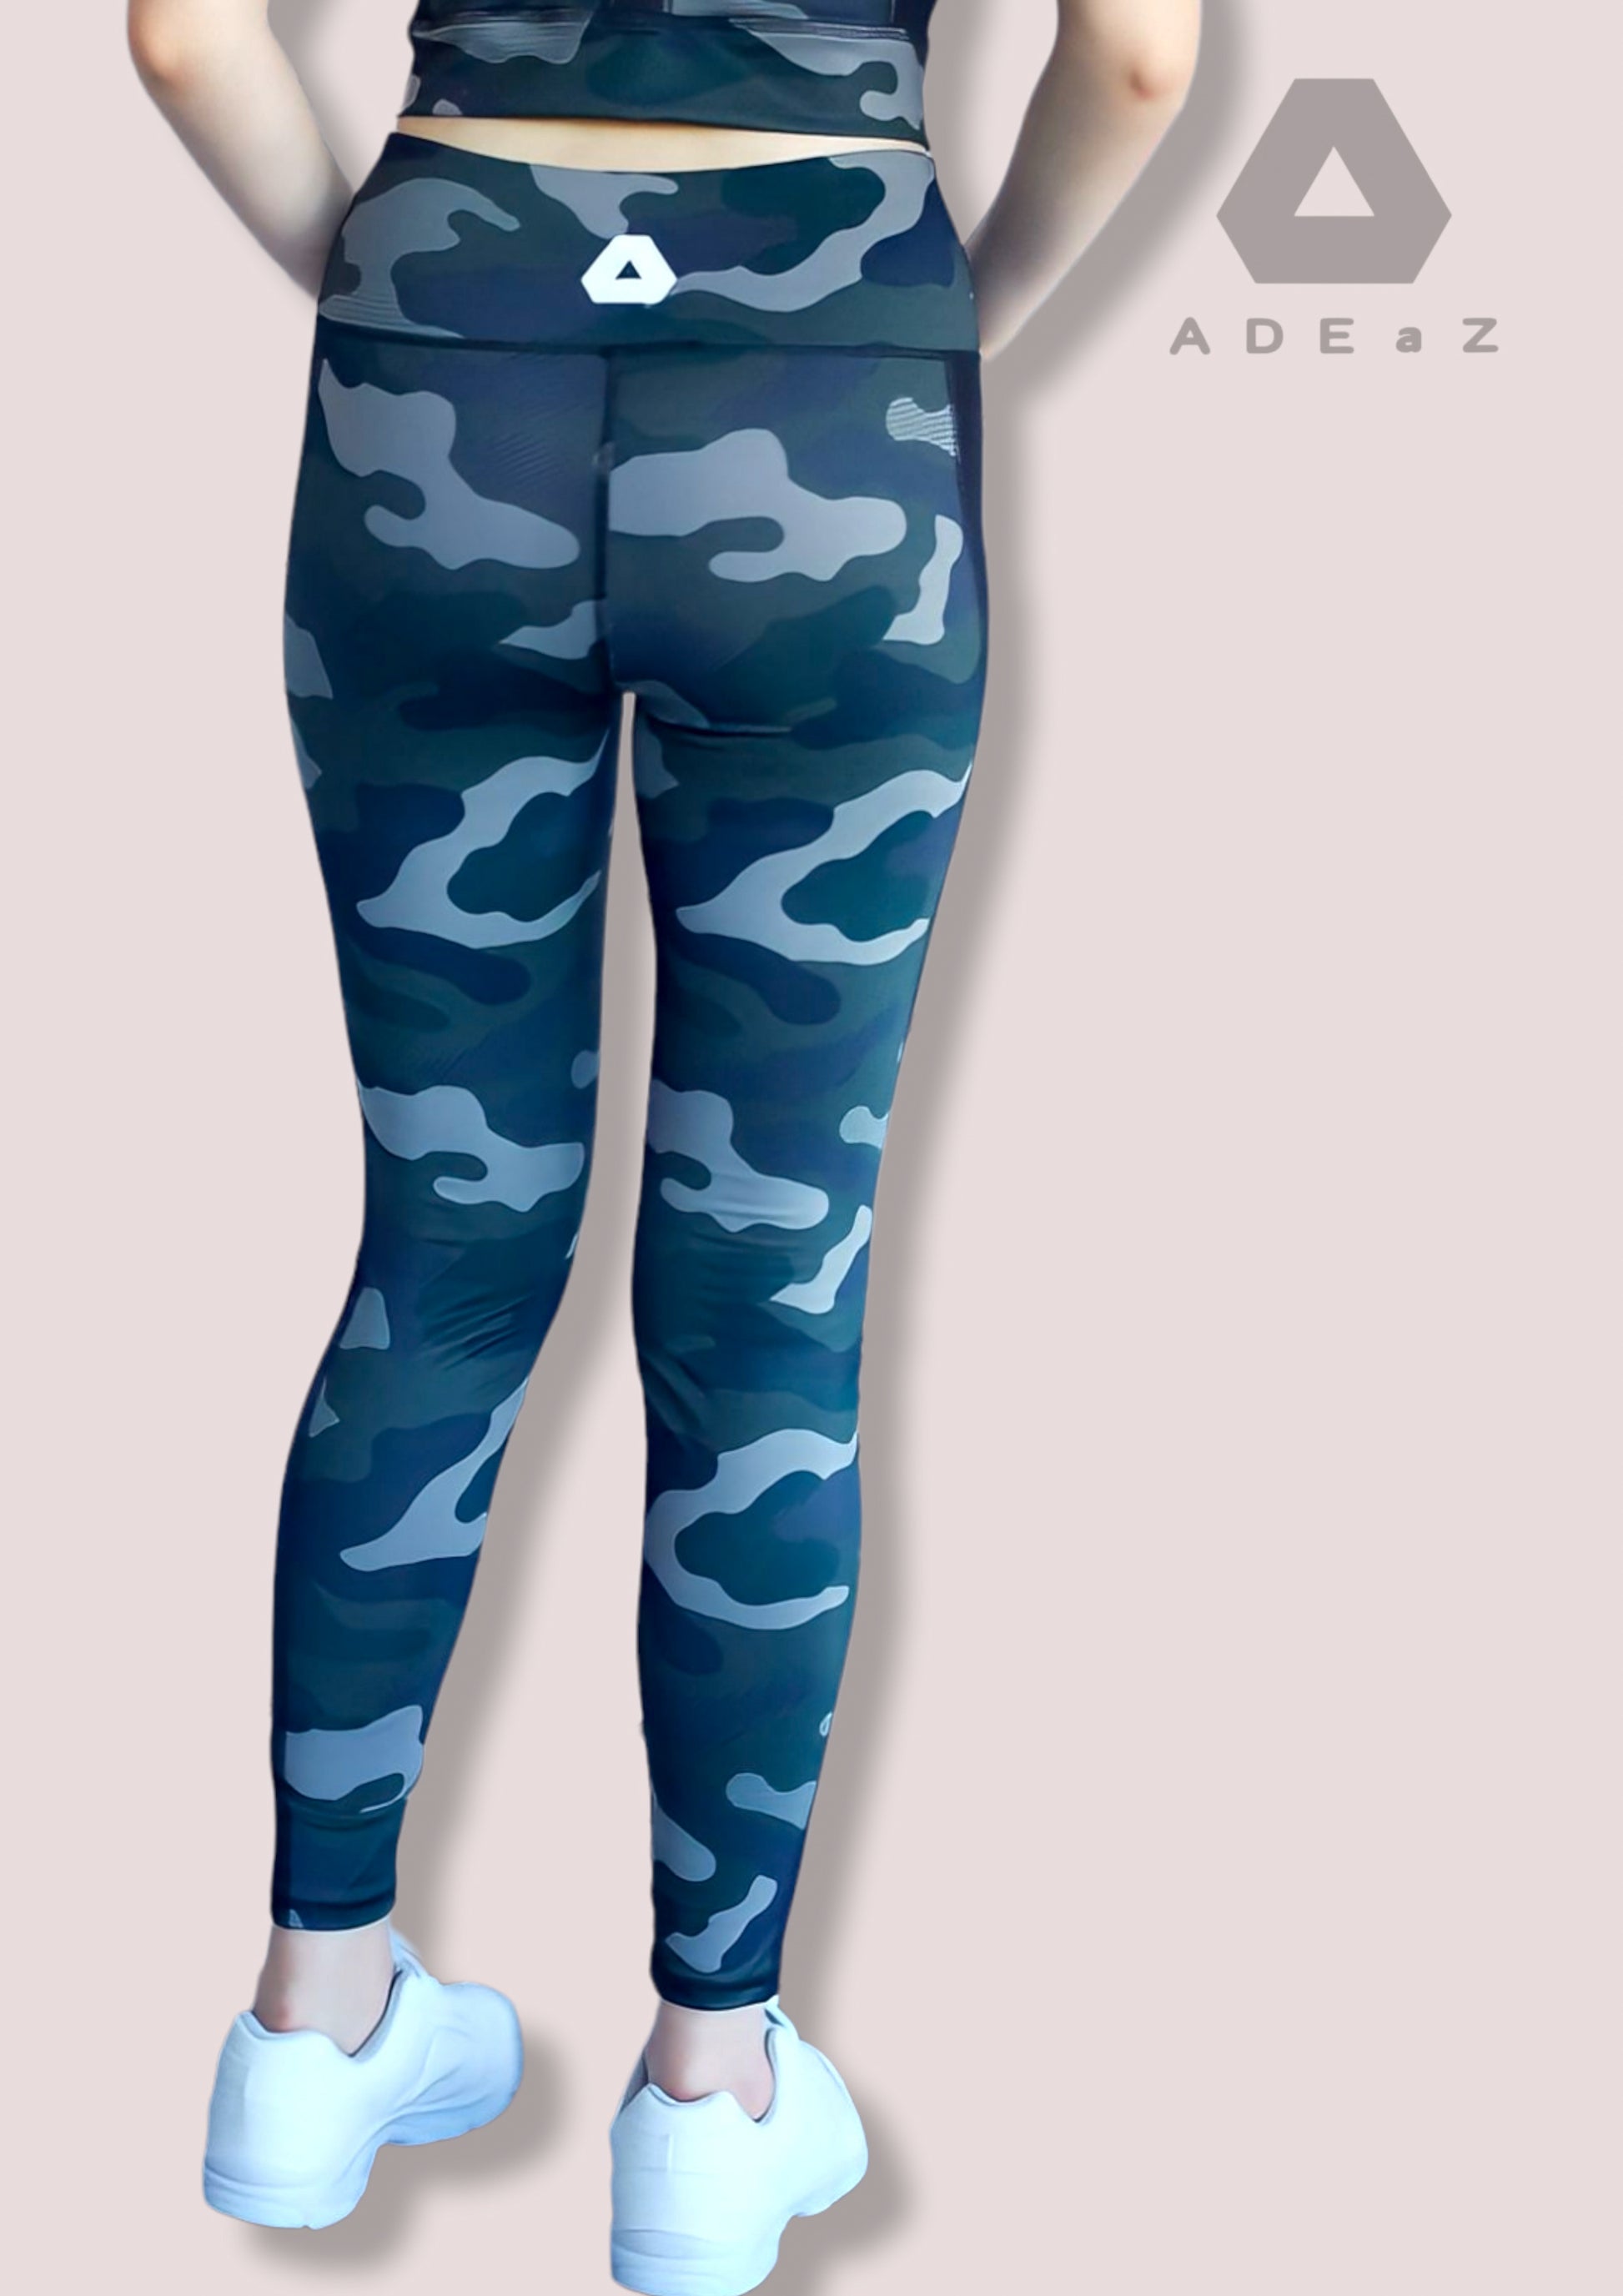 Ladies Camo Tights: Stylish and form-fitting camouflage-patterned leggings for women.